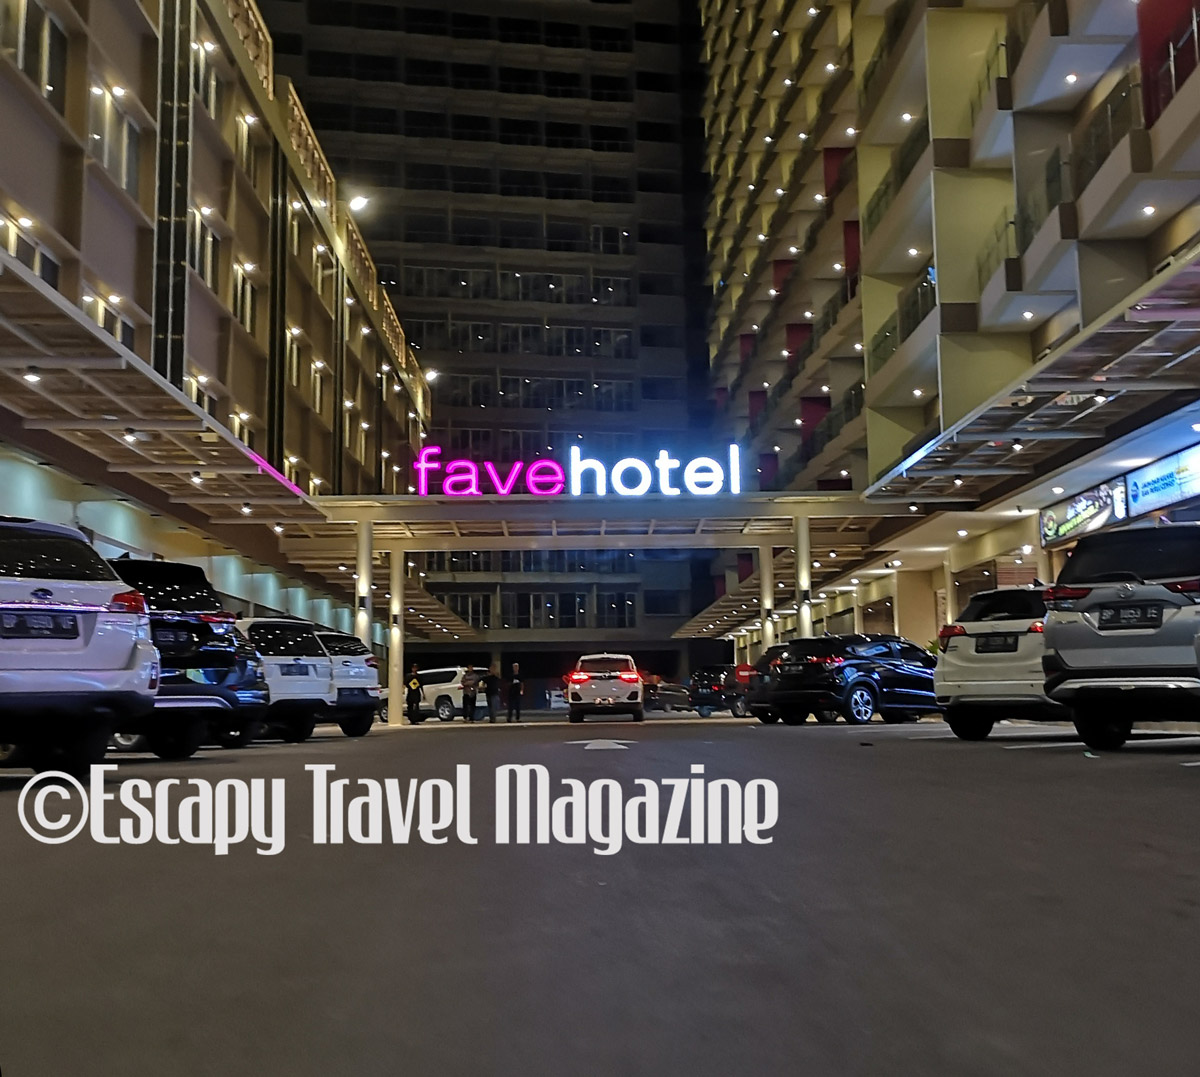 Where to stay in Batam, recommended hotels in batam, where to stay in Indonesia, favehotel Nagoya batam, favehotel, favehotel batam, favehotel batam hotel, batam hotels, batam hotel reviews, favehotel reviews, Nagoya Batam hotels, hotels around Nagoya, hotels around Nagoya batam, hotels near Nagoya batam, hotels in Nagoya batam